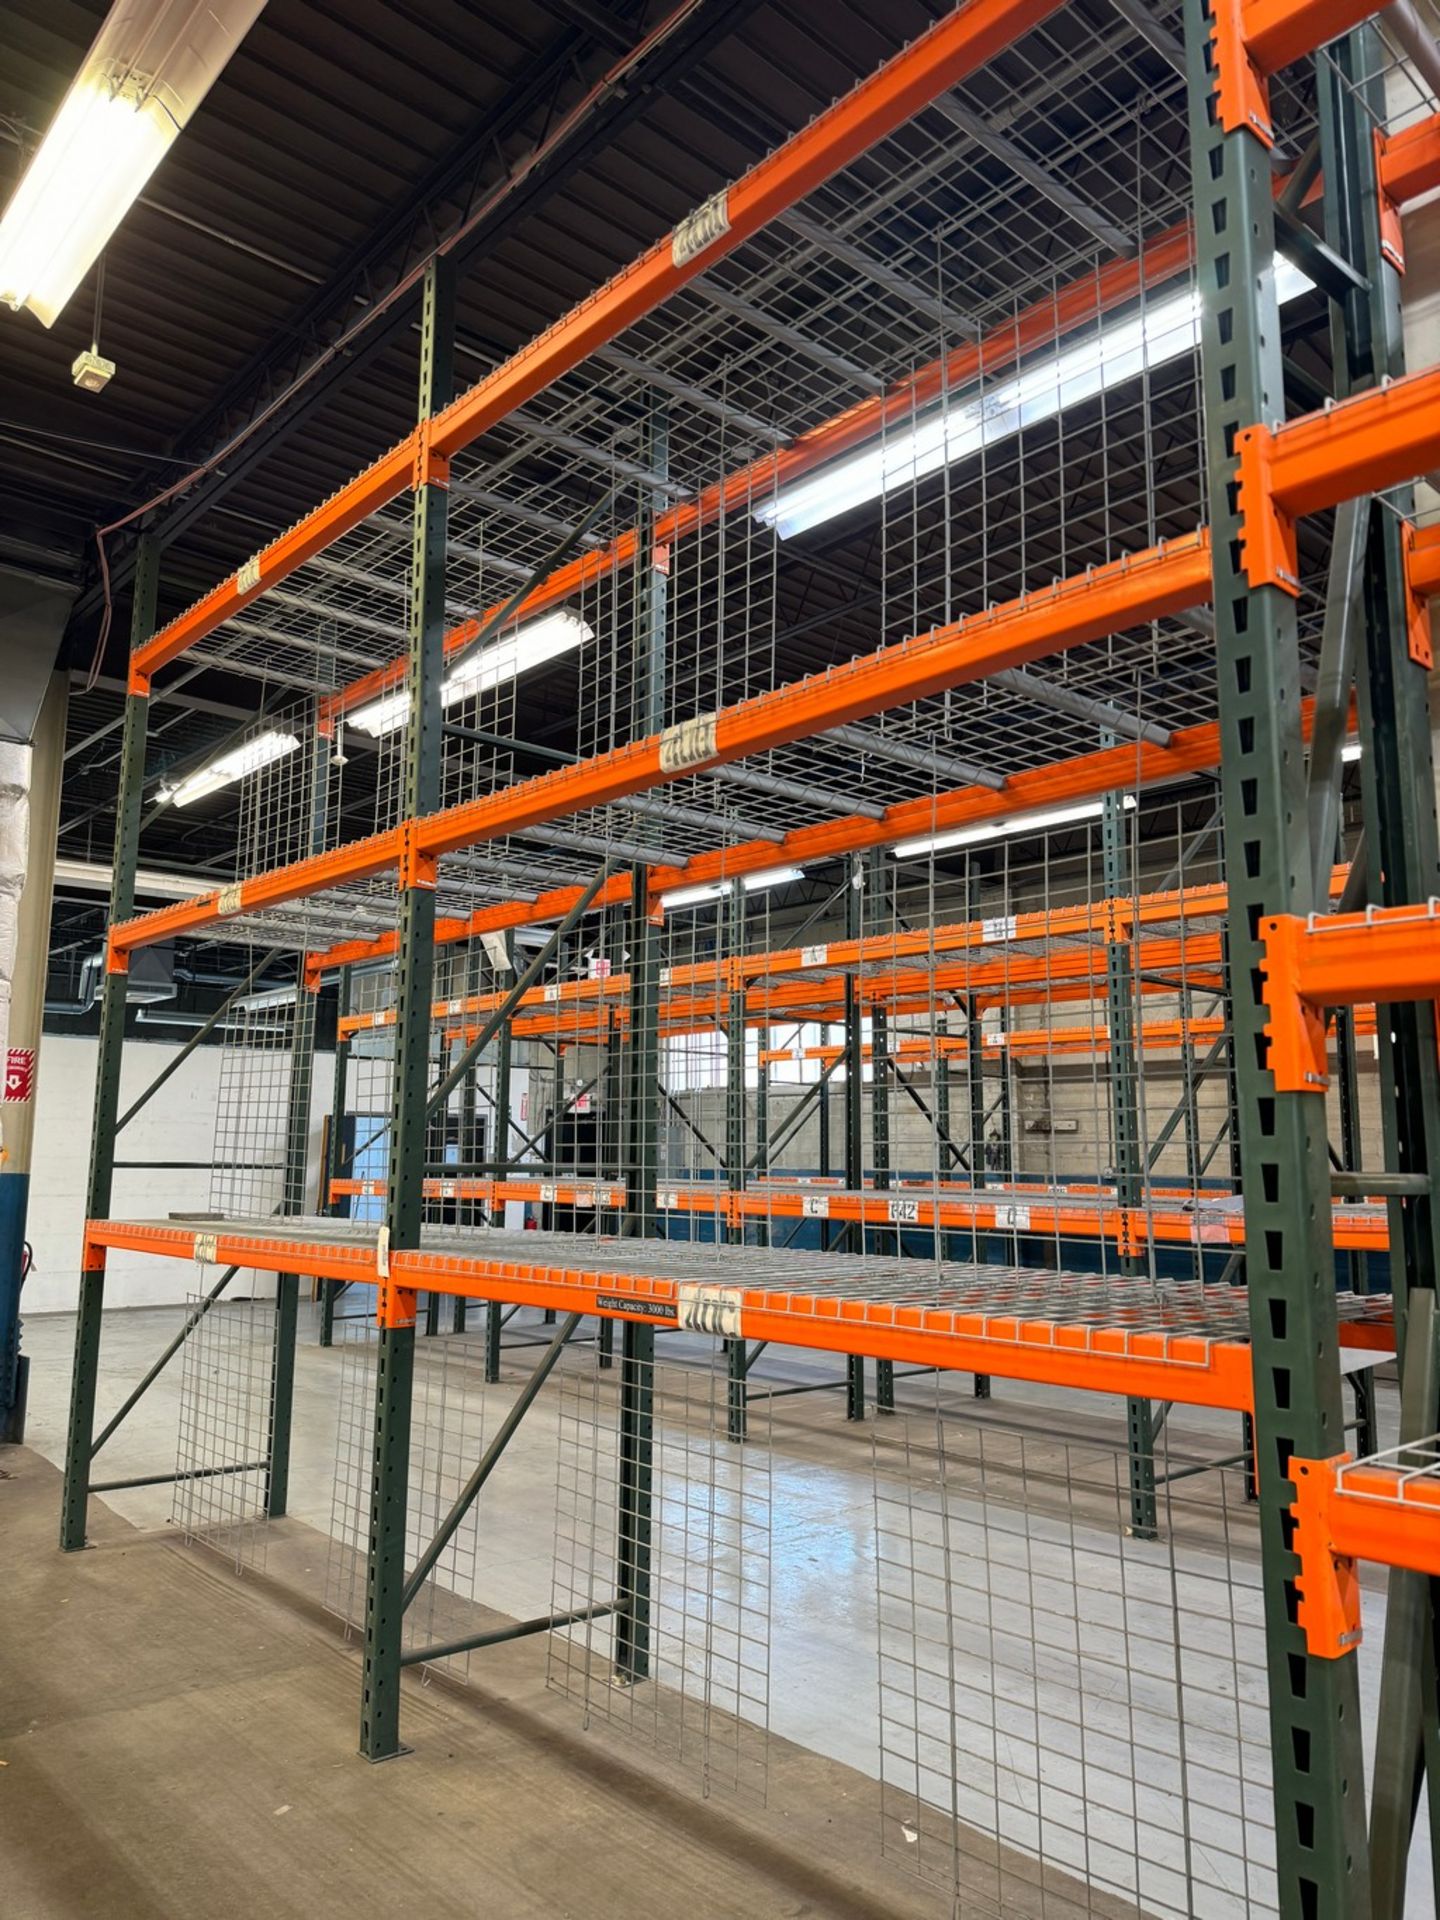 10-Sections Heavy Duty Pallet Racking, 96"W x 36"D x 168"H, 3000 LB Weight Capacity